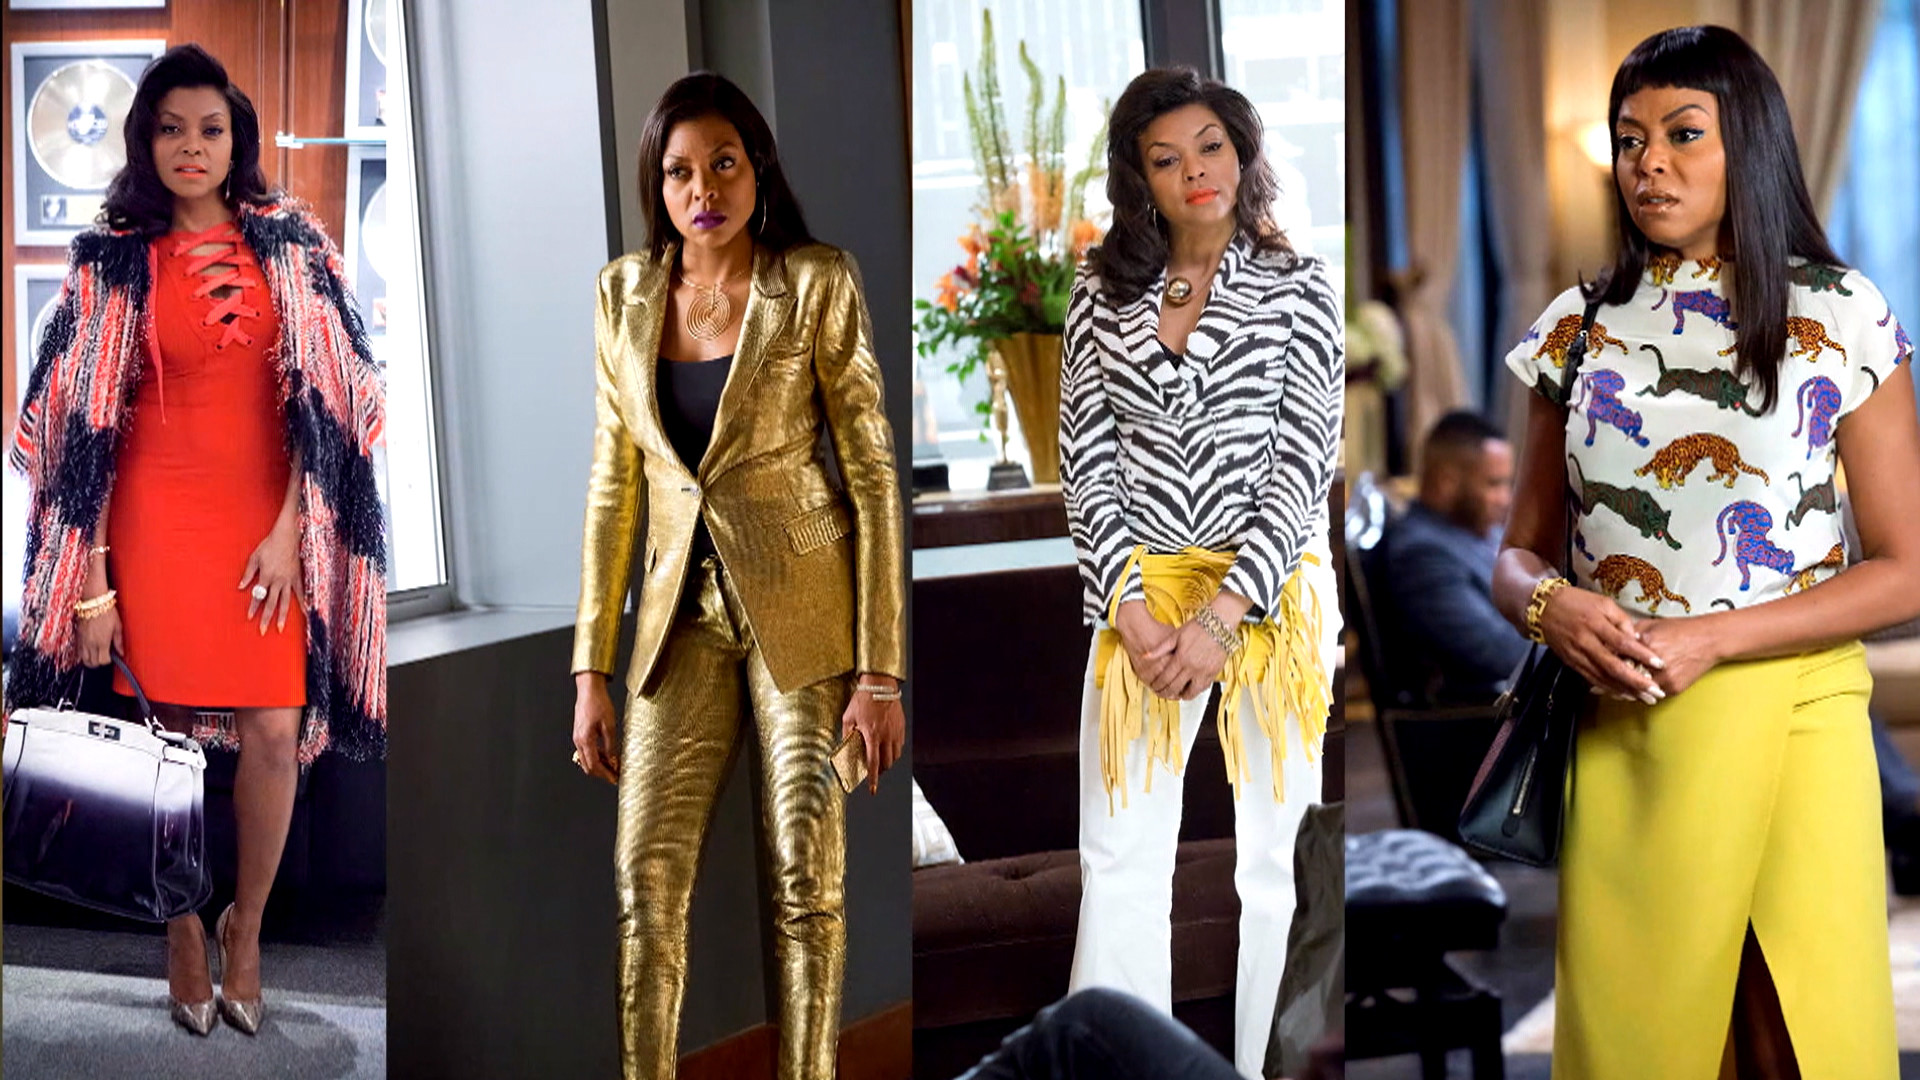 1920x1080 Before you watch 'Empire,' get the scoop on Cookie's fab new wardrobe